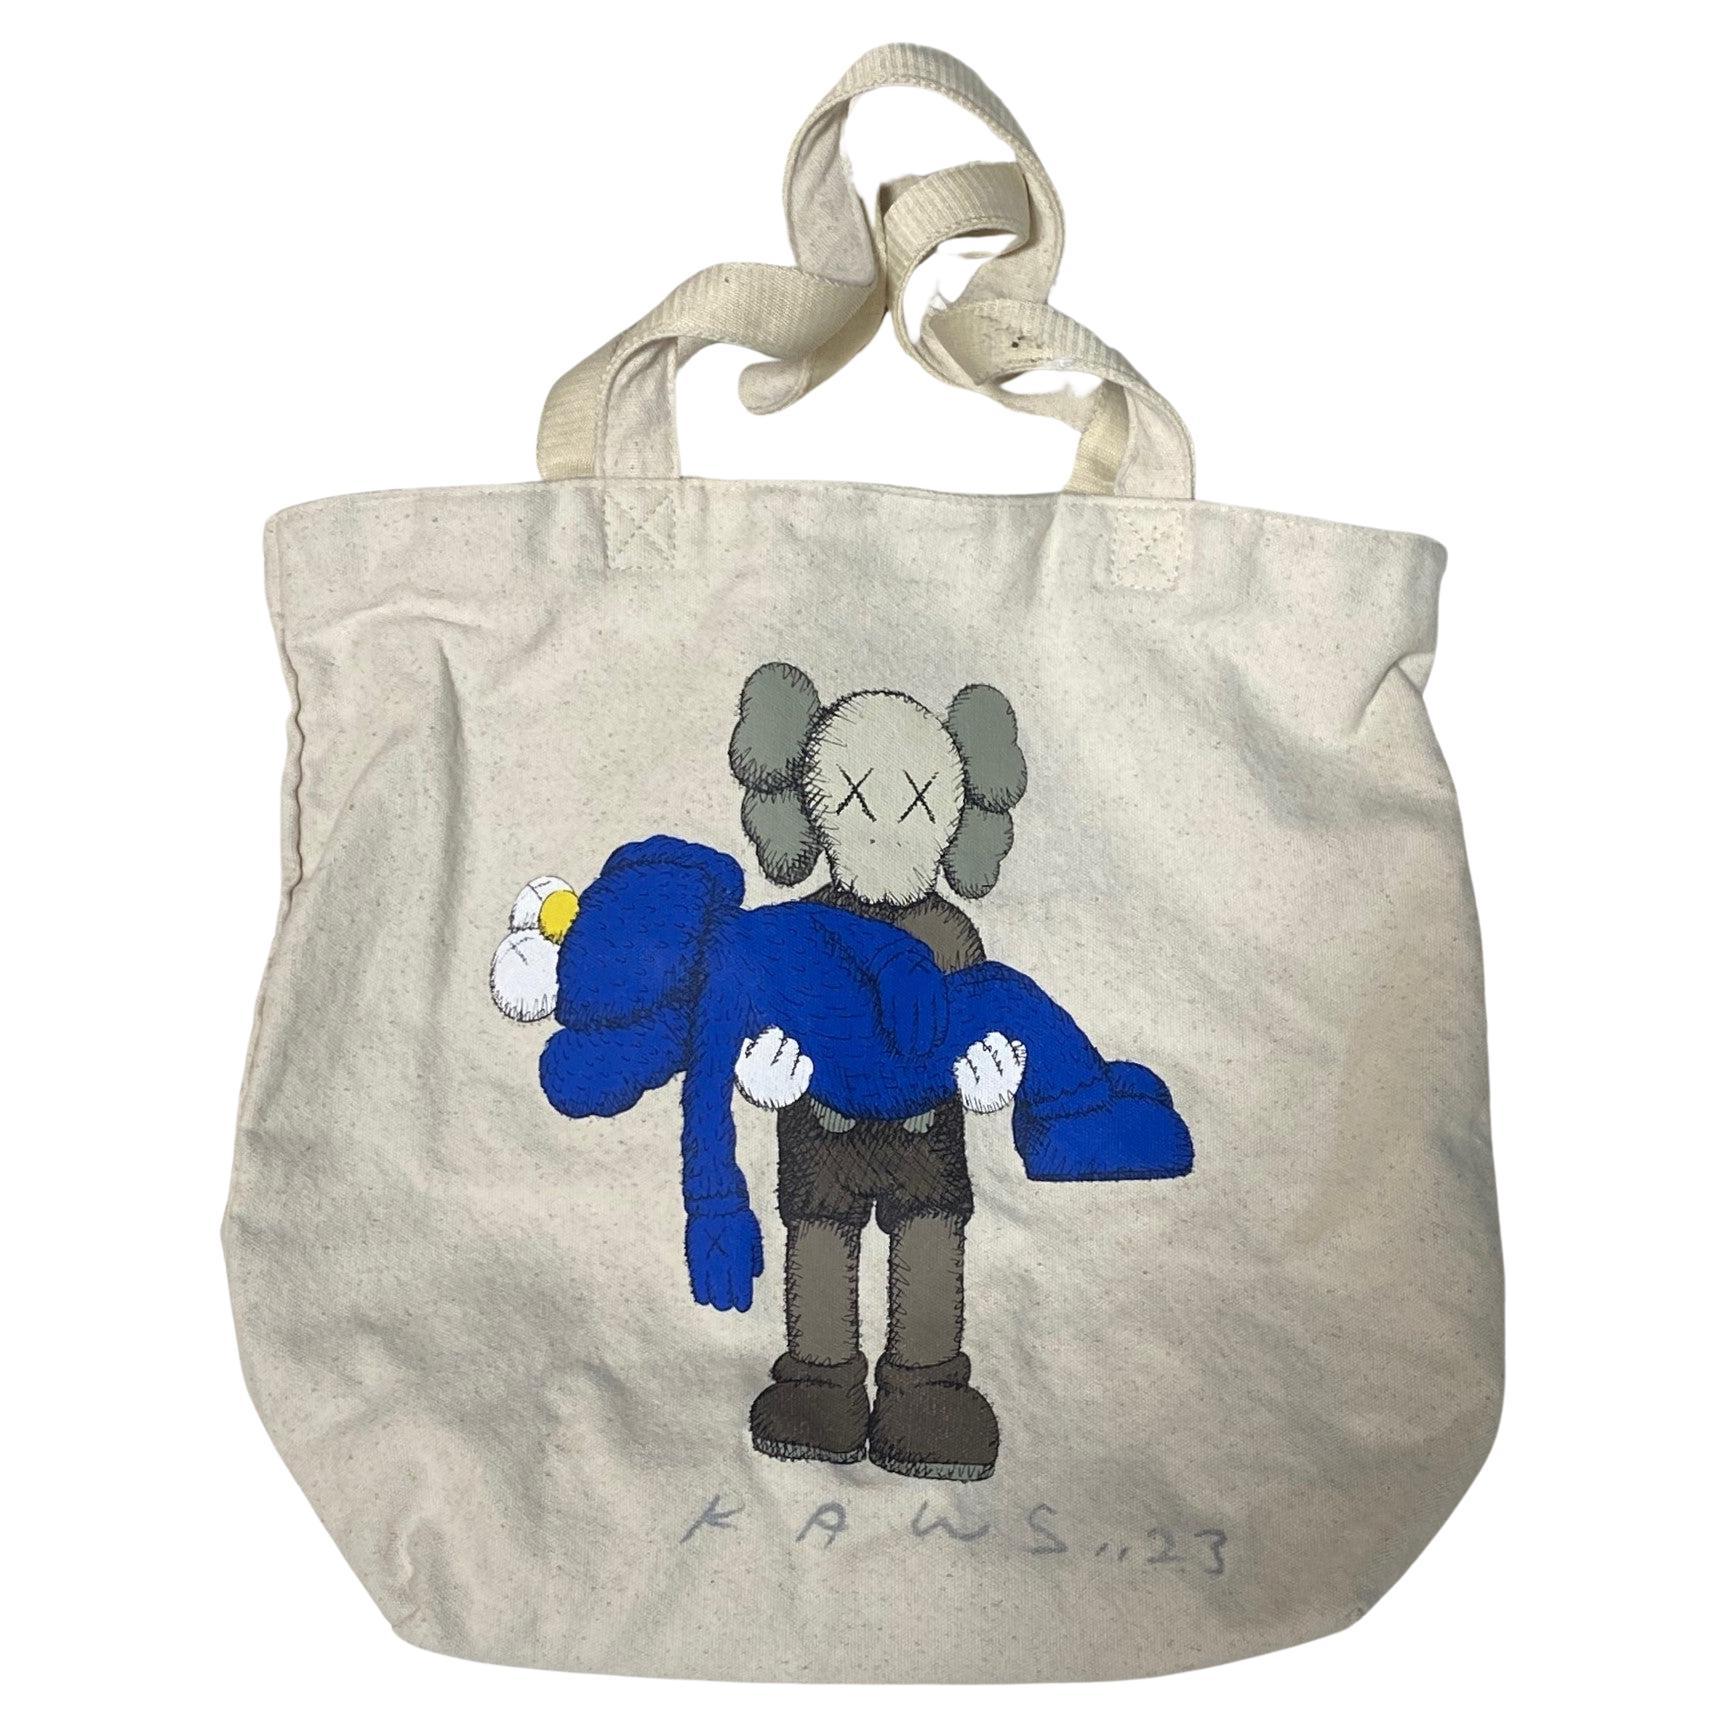 KAWS Brian Donnelly Rare Signed Natural Canvas Uniqlo X Tote Shopping Bag Gone